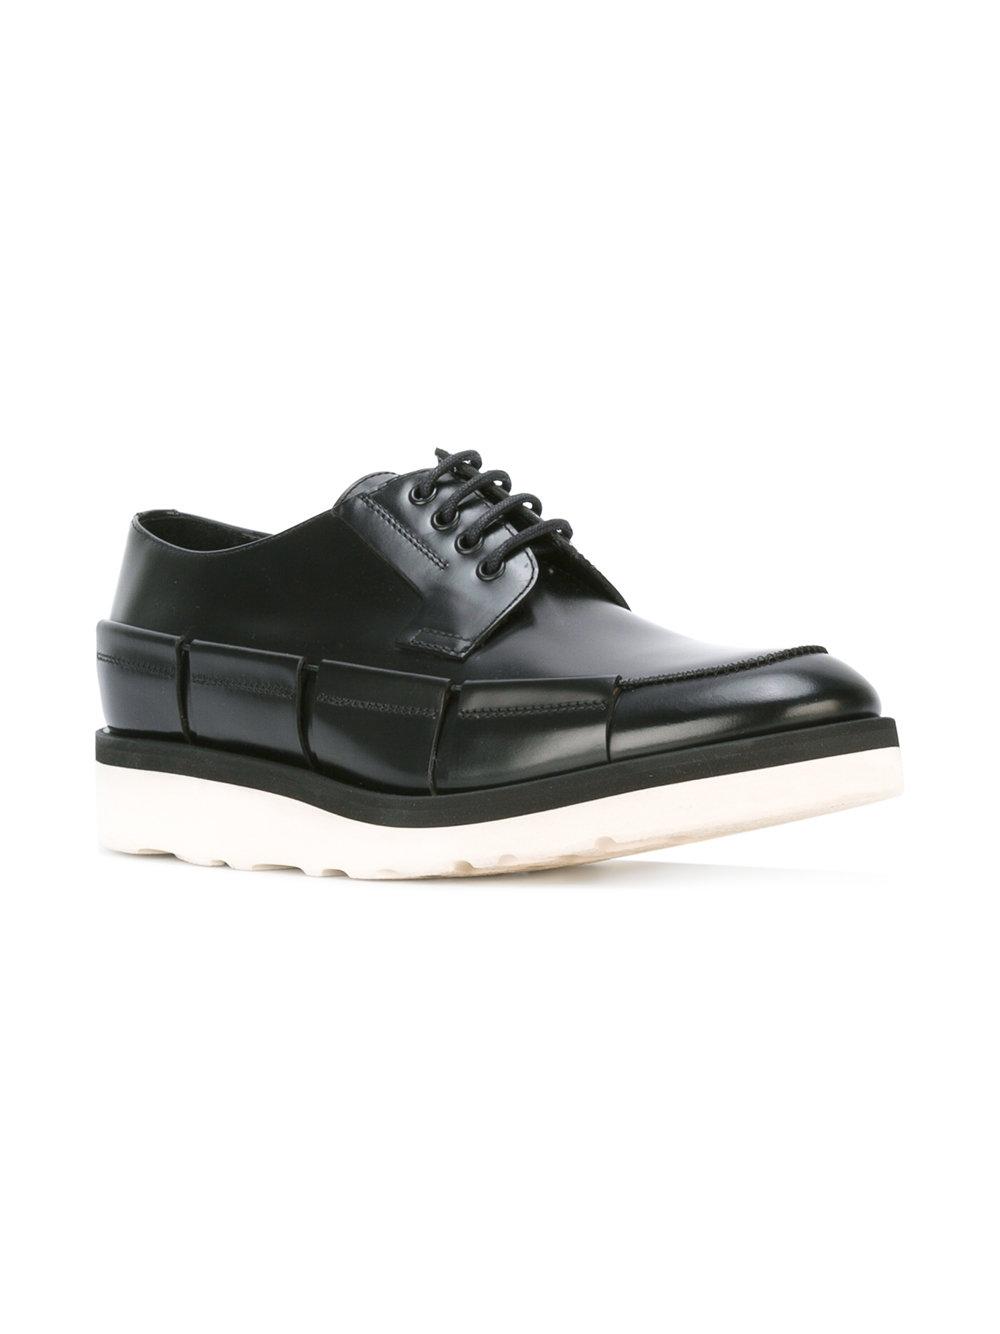 OAMC White Sole Oxford Shoes in Black for Men Lyst